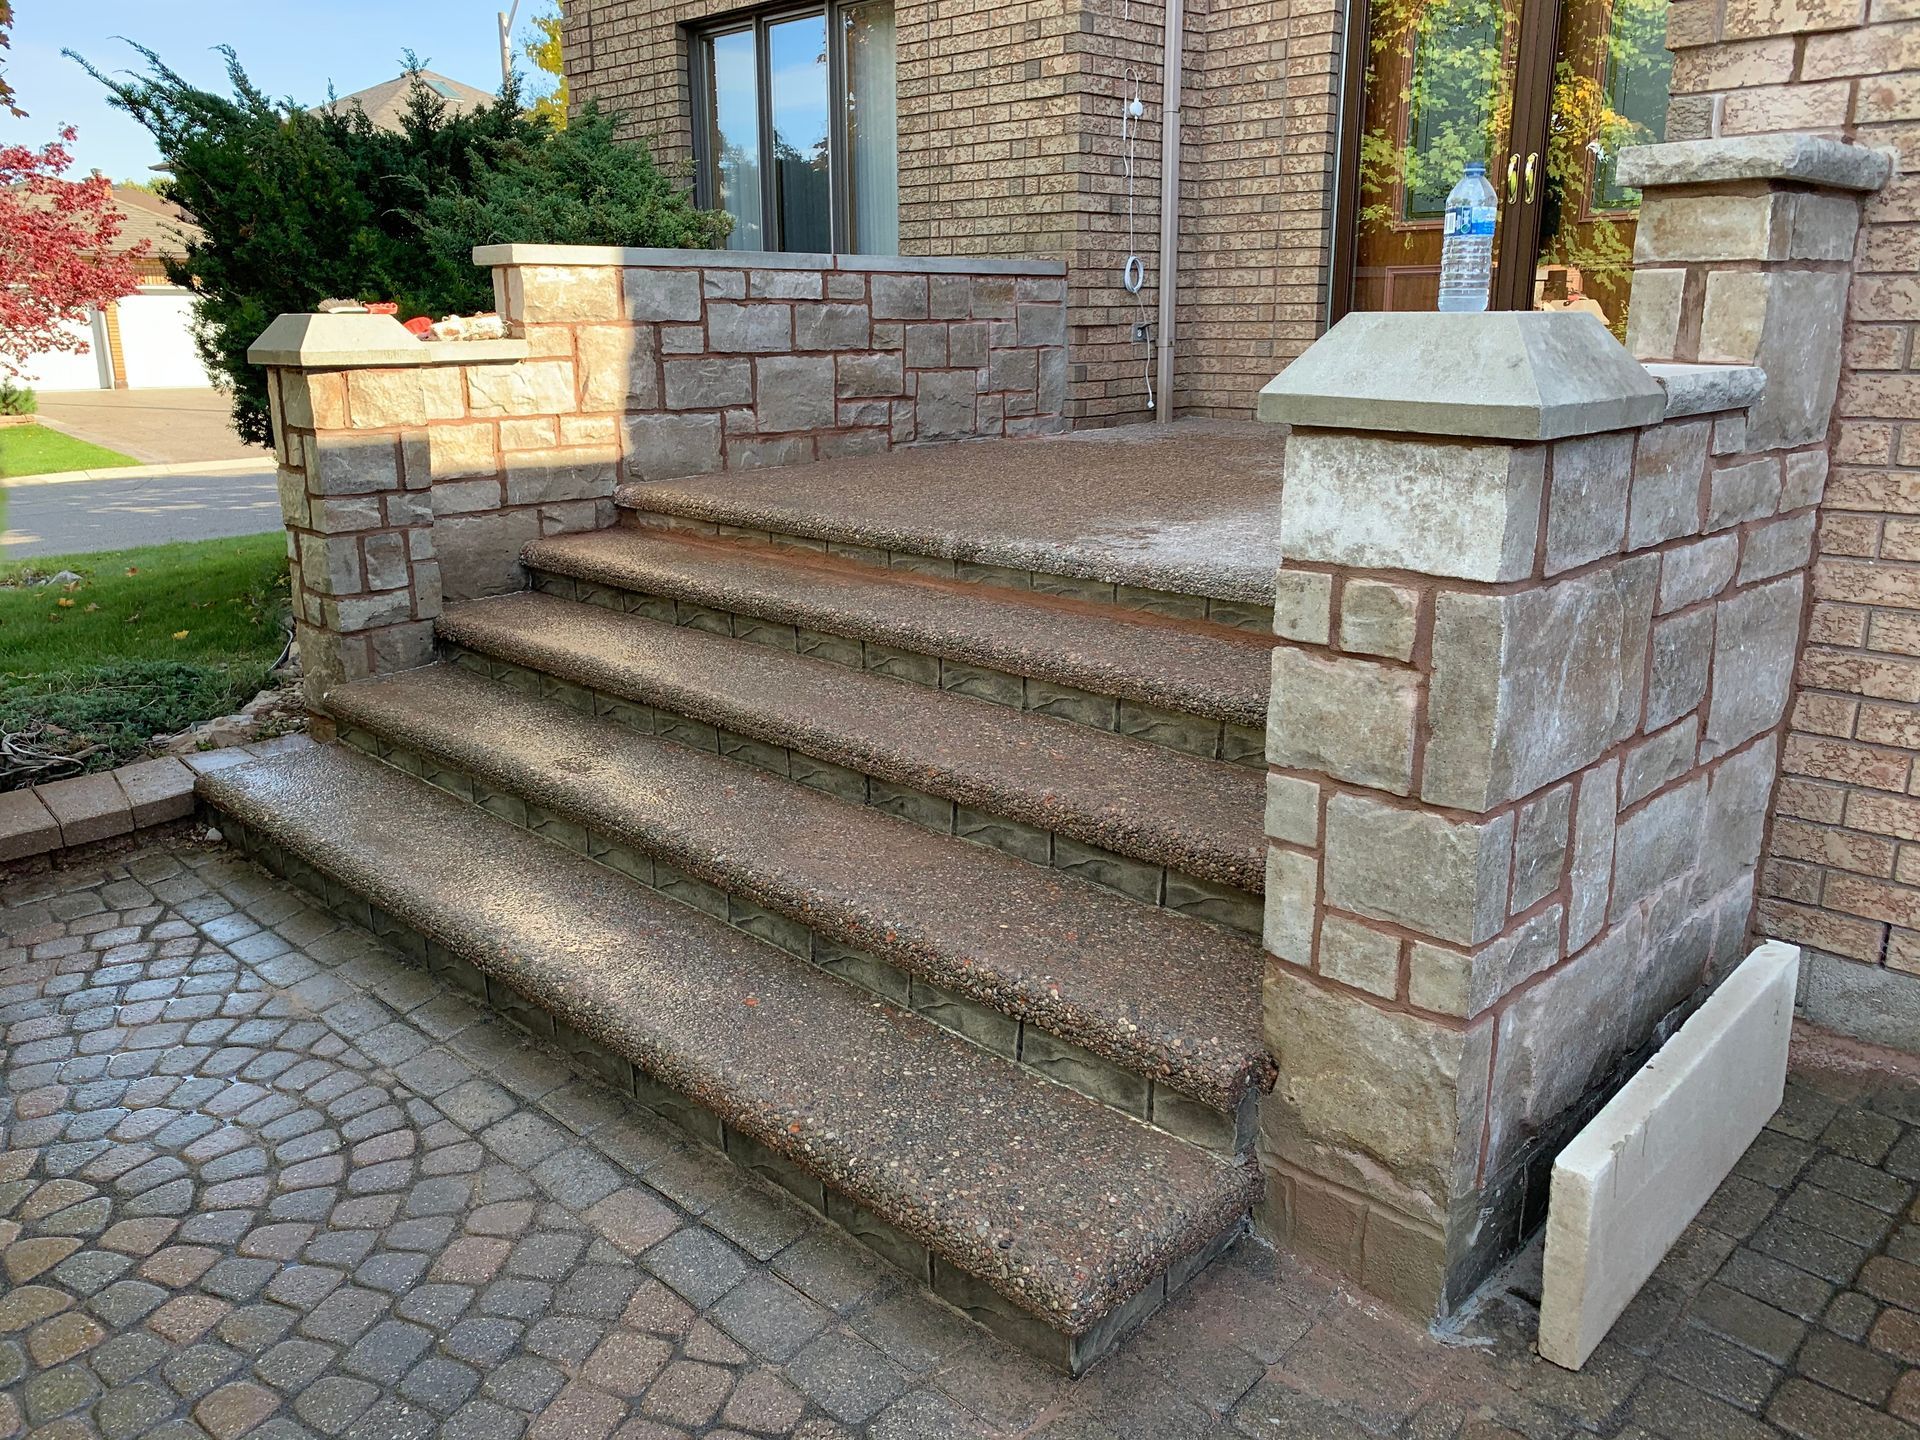 a set of stairs leading up to a brick building .